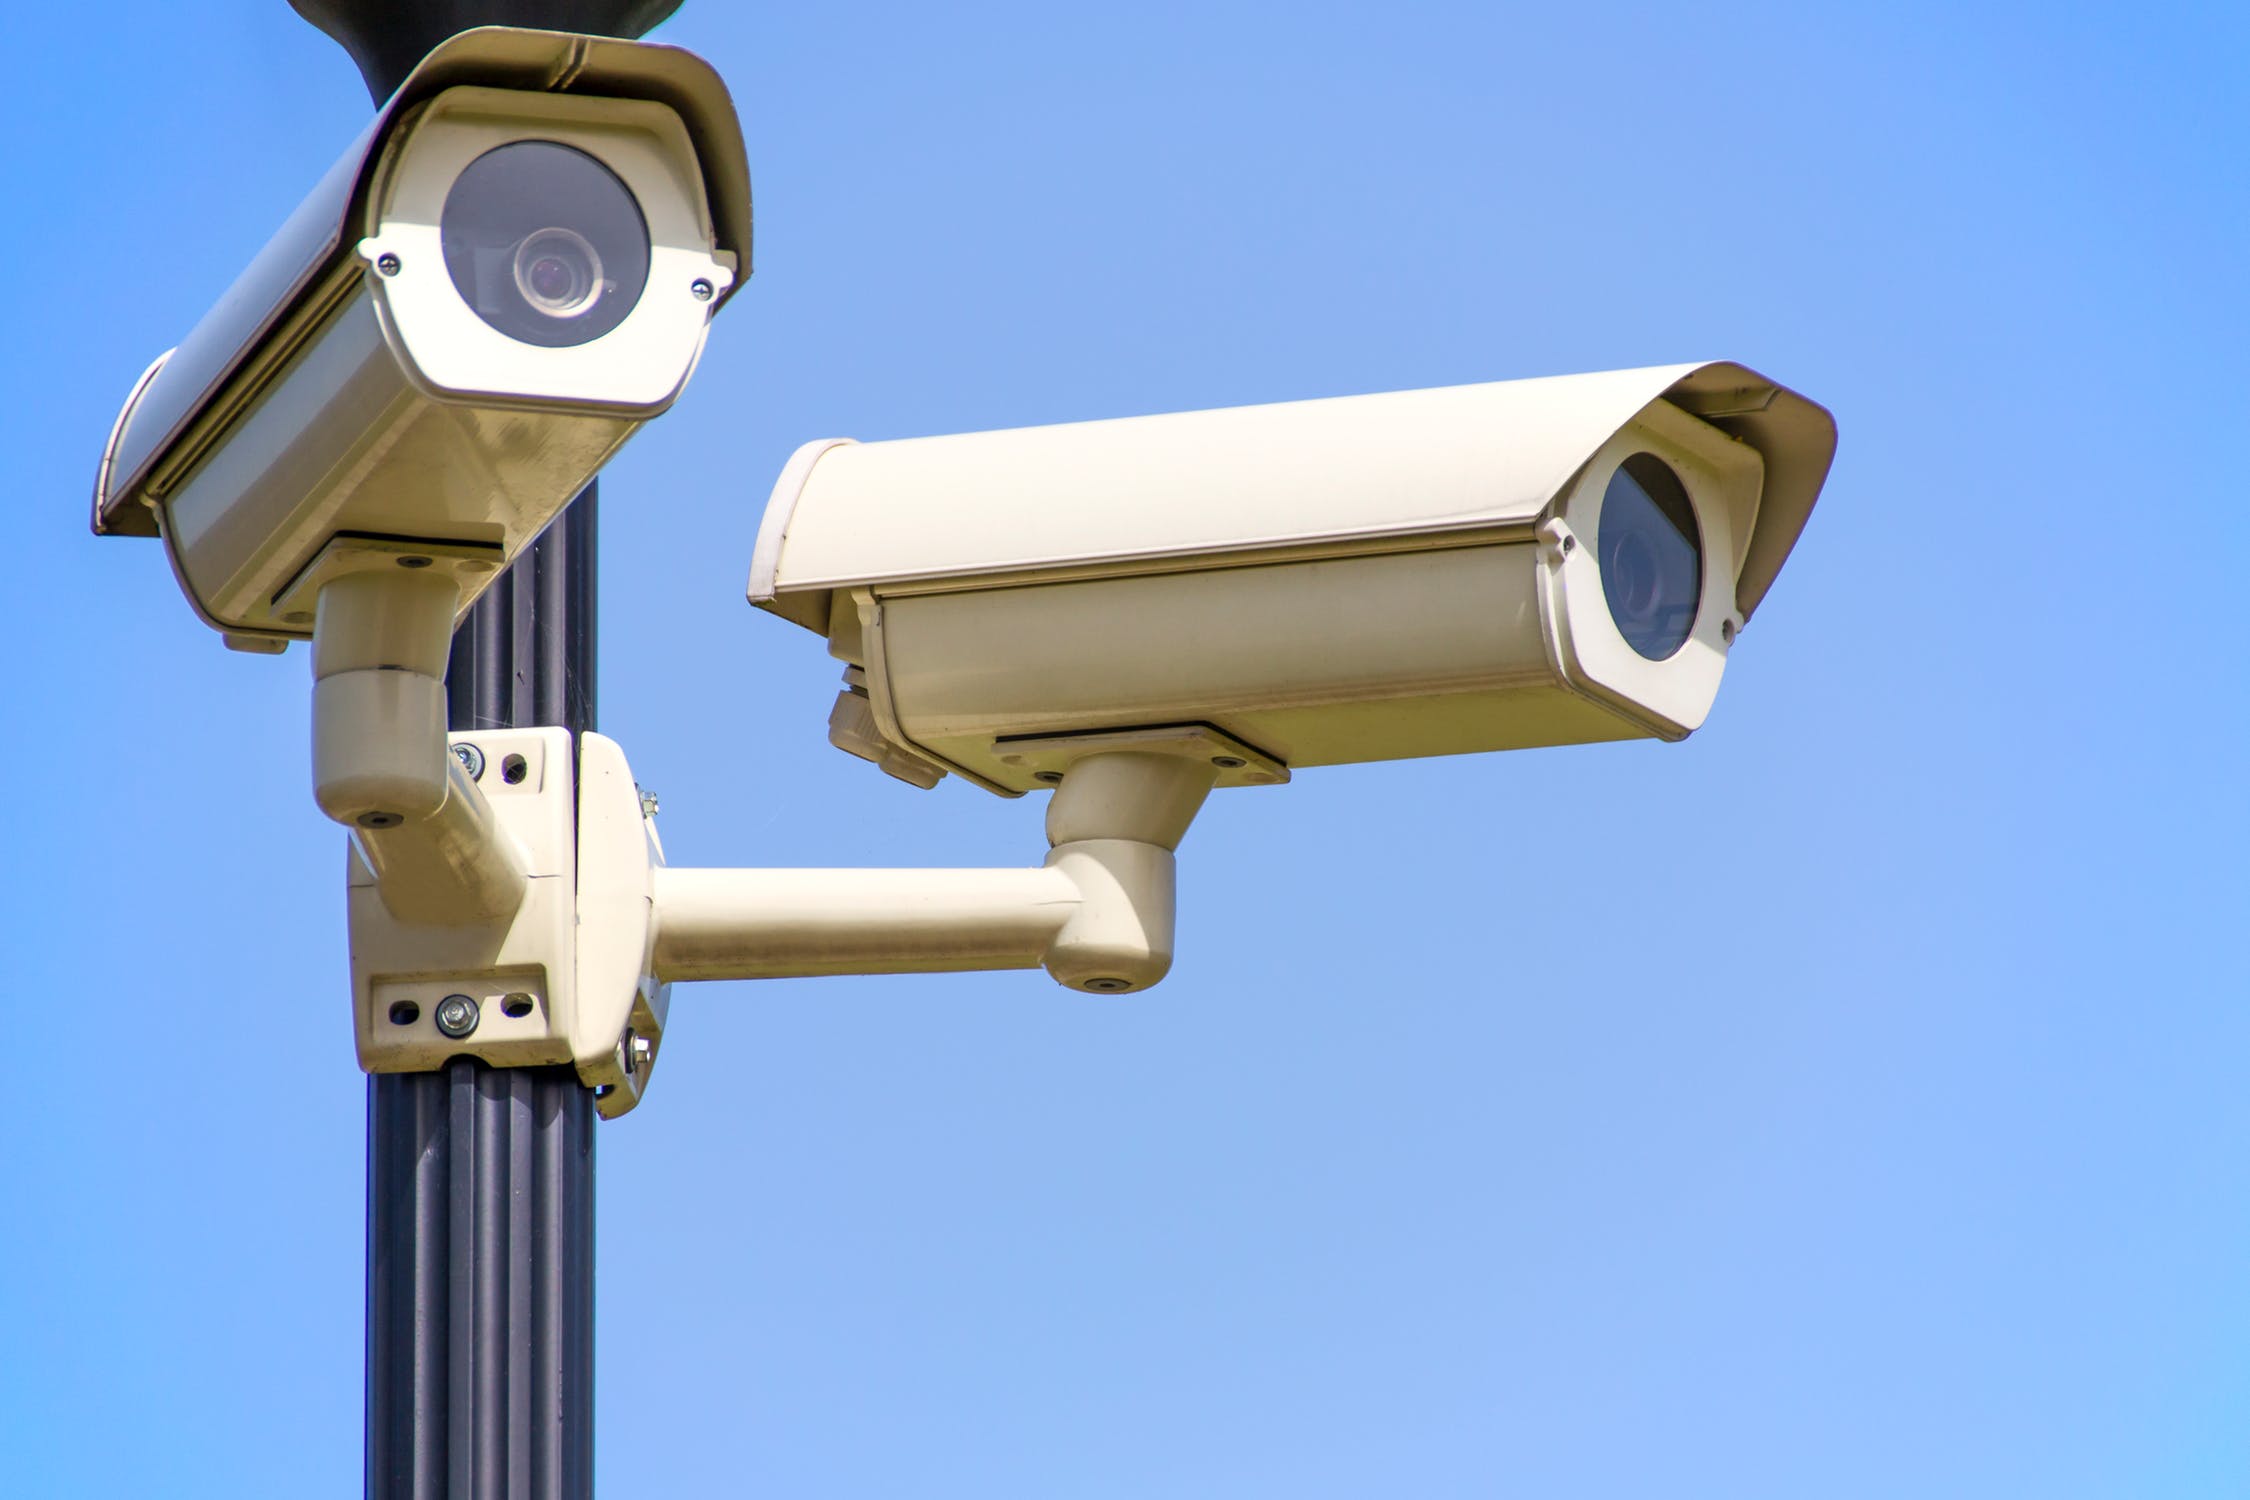 Common Mistakes To Avoid While Installing CCTV Cameras